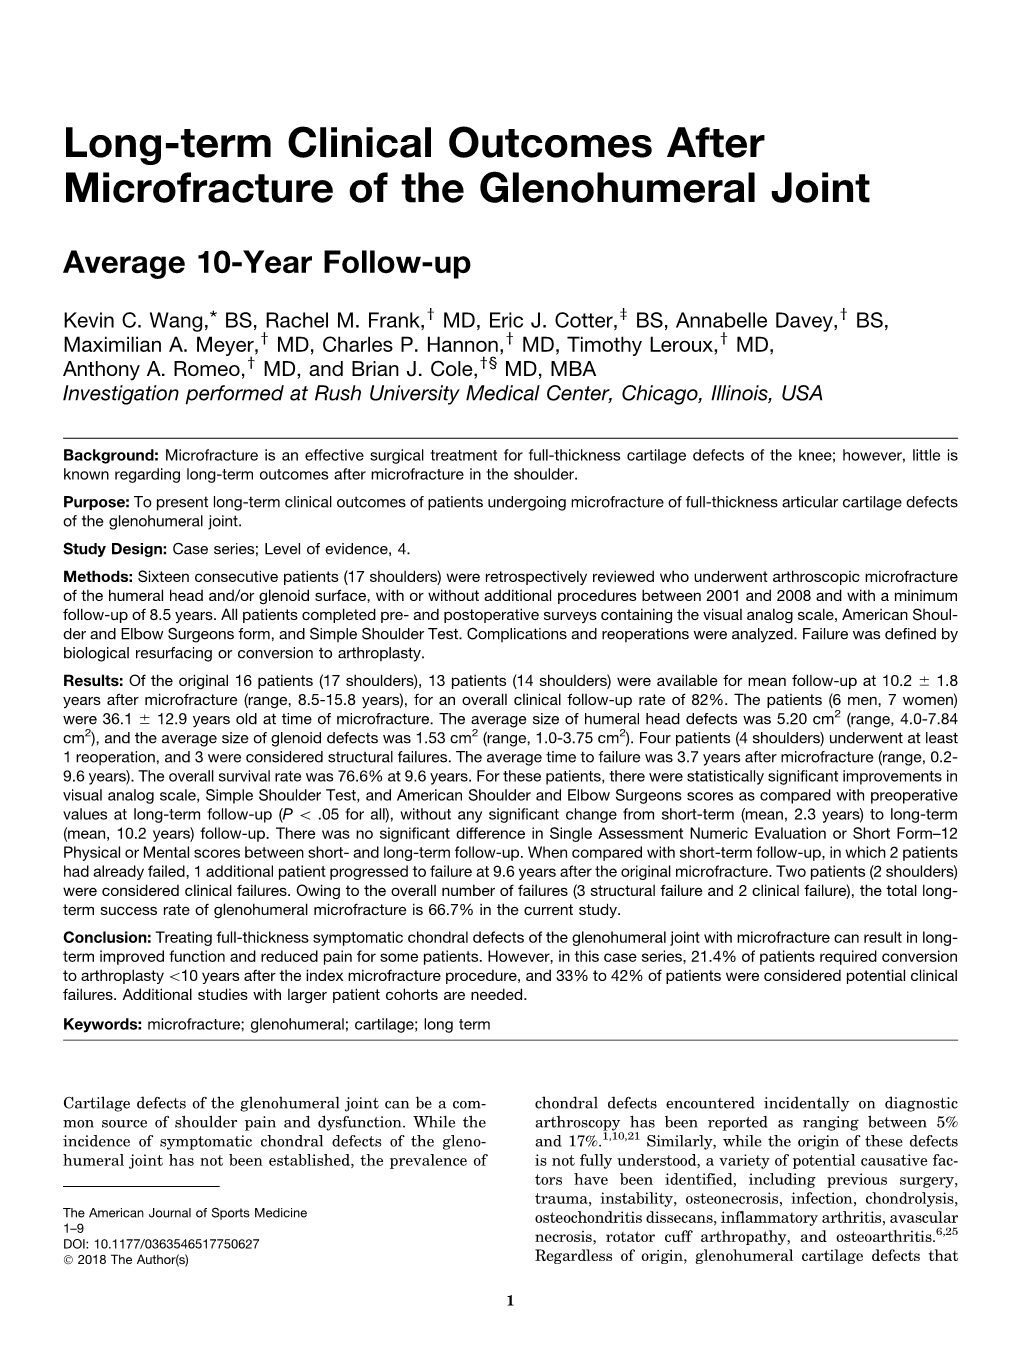 Long-Term Clinical Outcomes After Microfracture of the Glenohumeral Joint